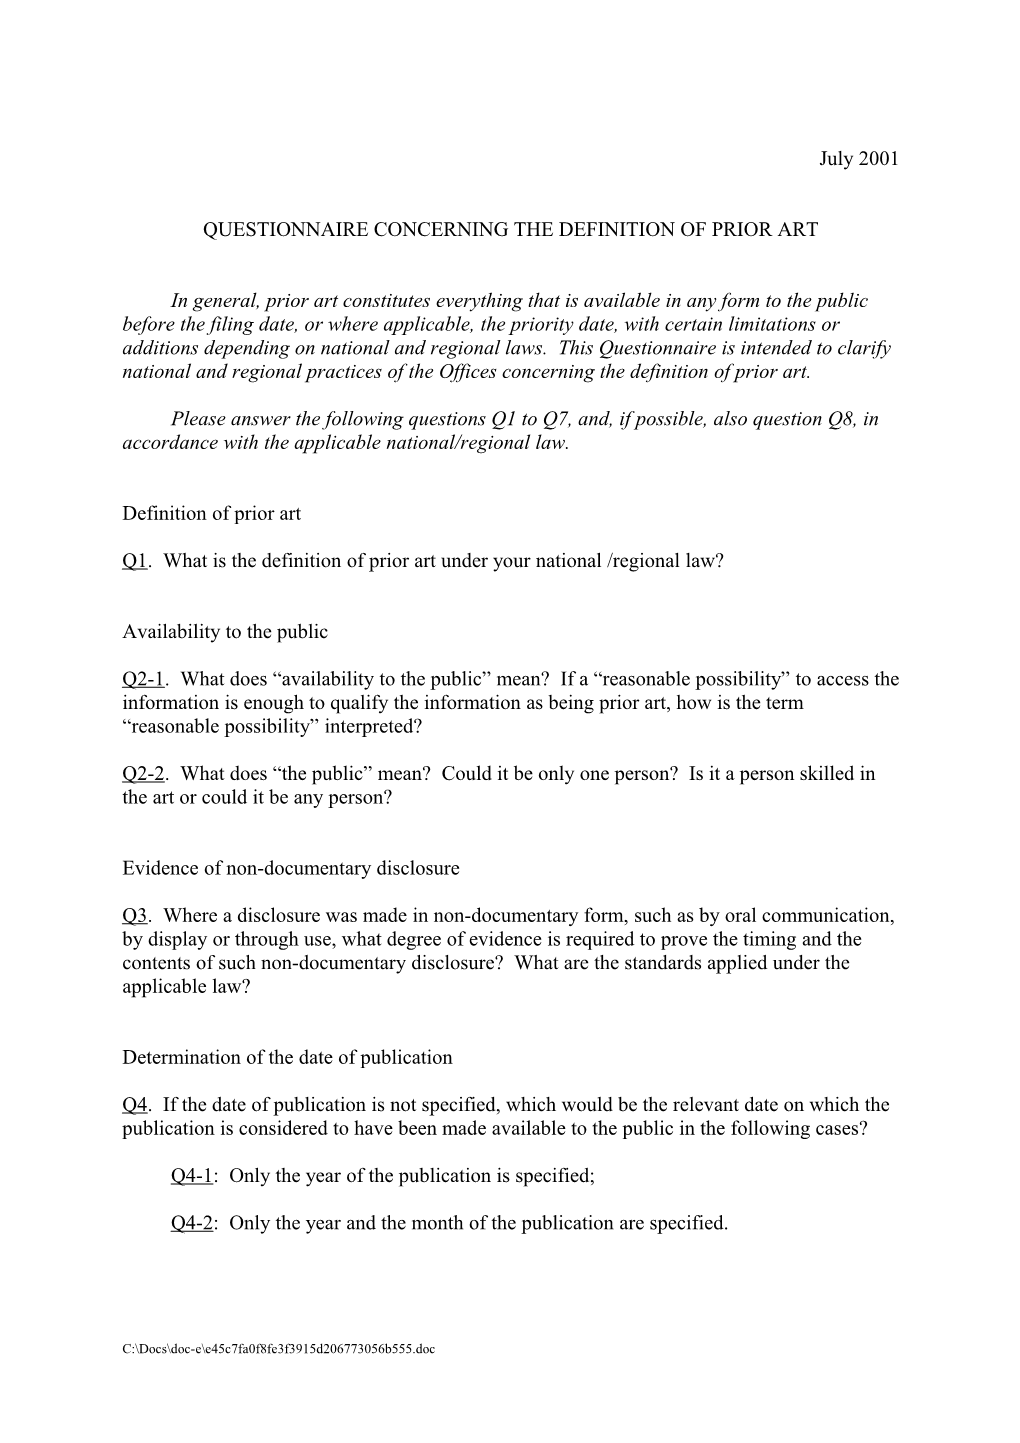 Questionnaire Concerning the Definition of Prior Art